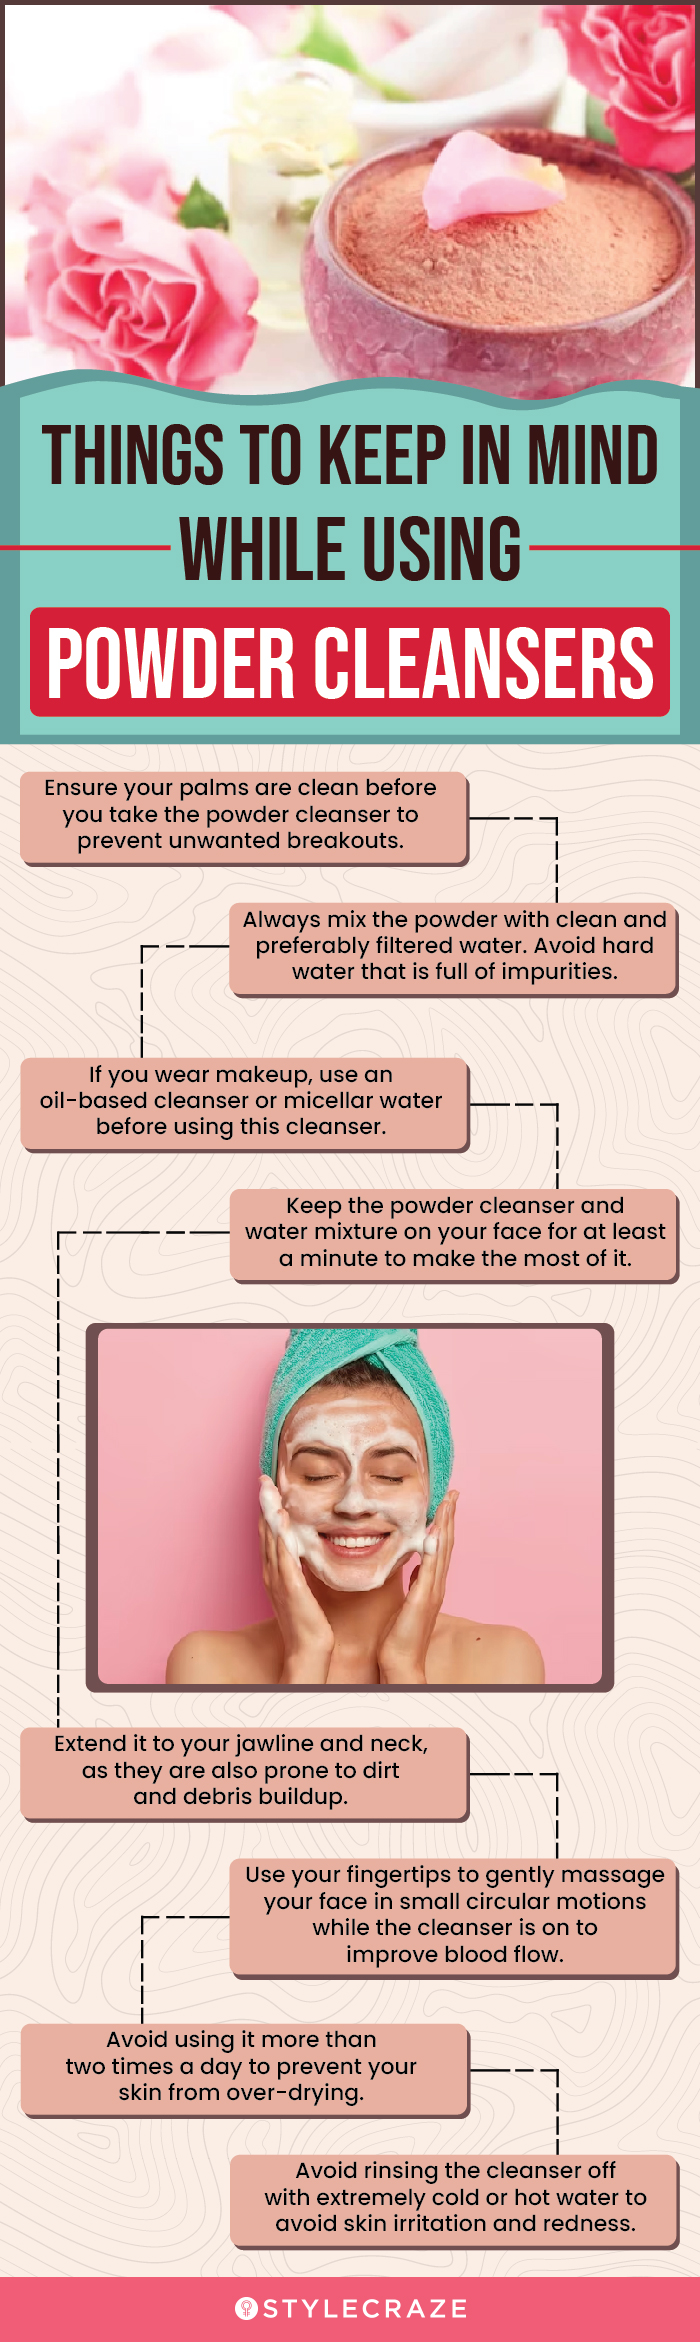 Things To Keep In Mind While Using Powder Cleansers (infographic)